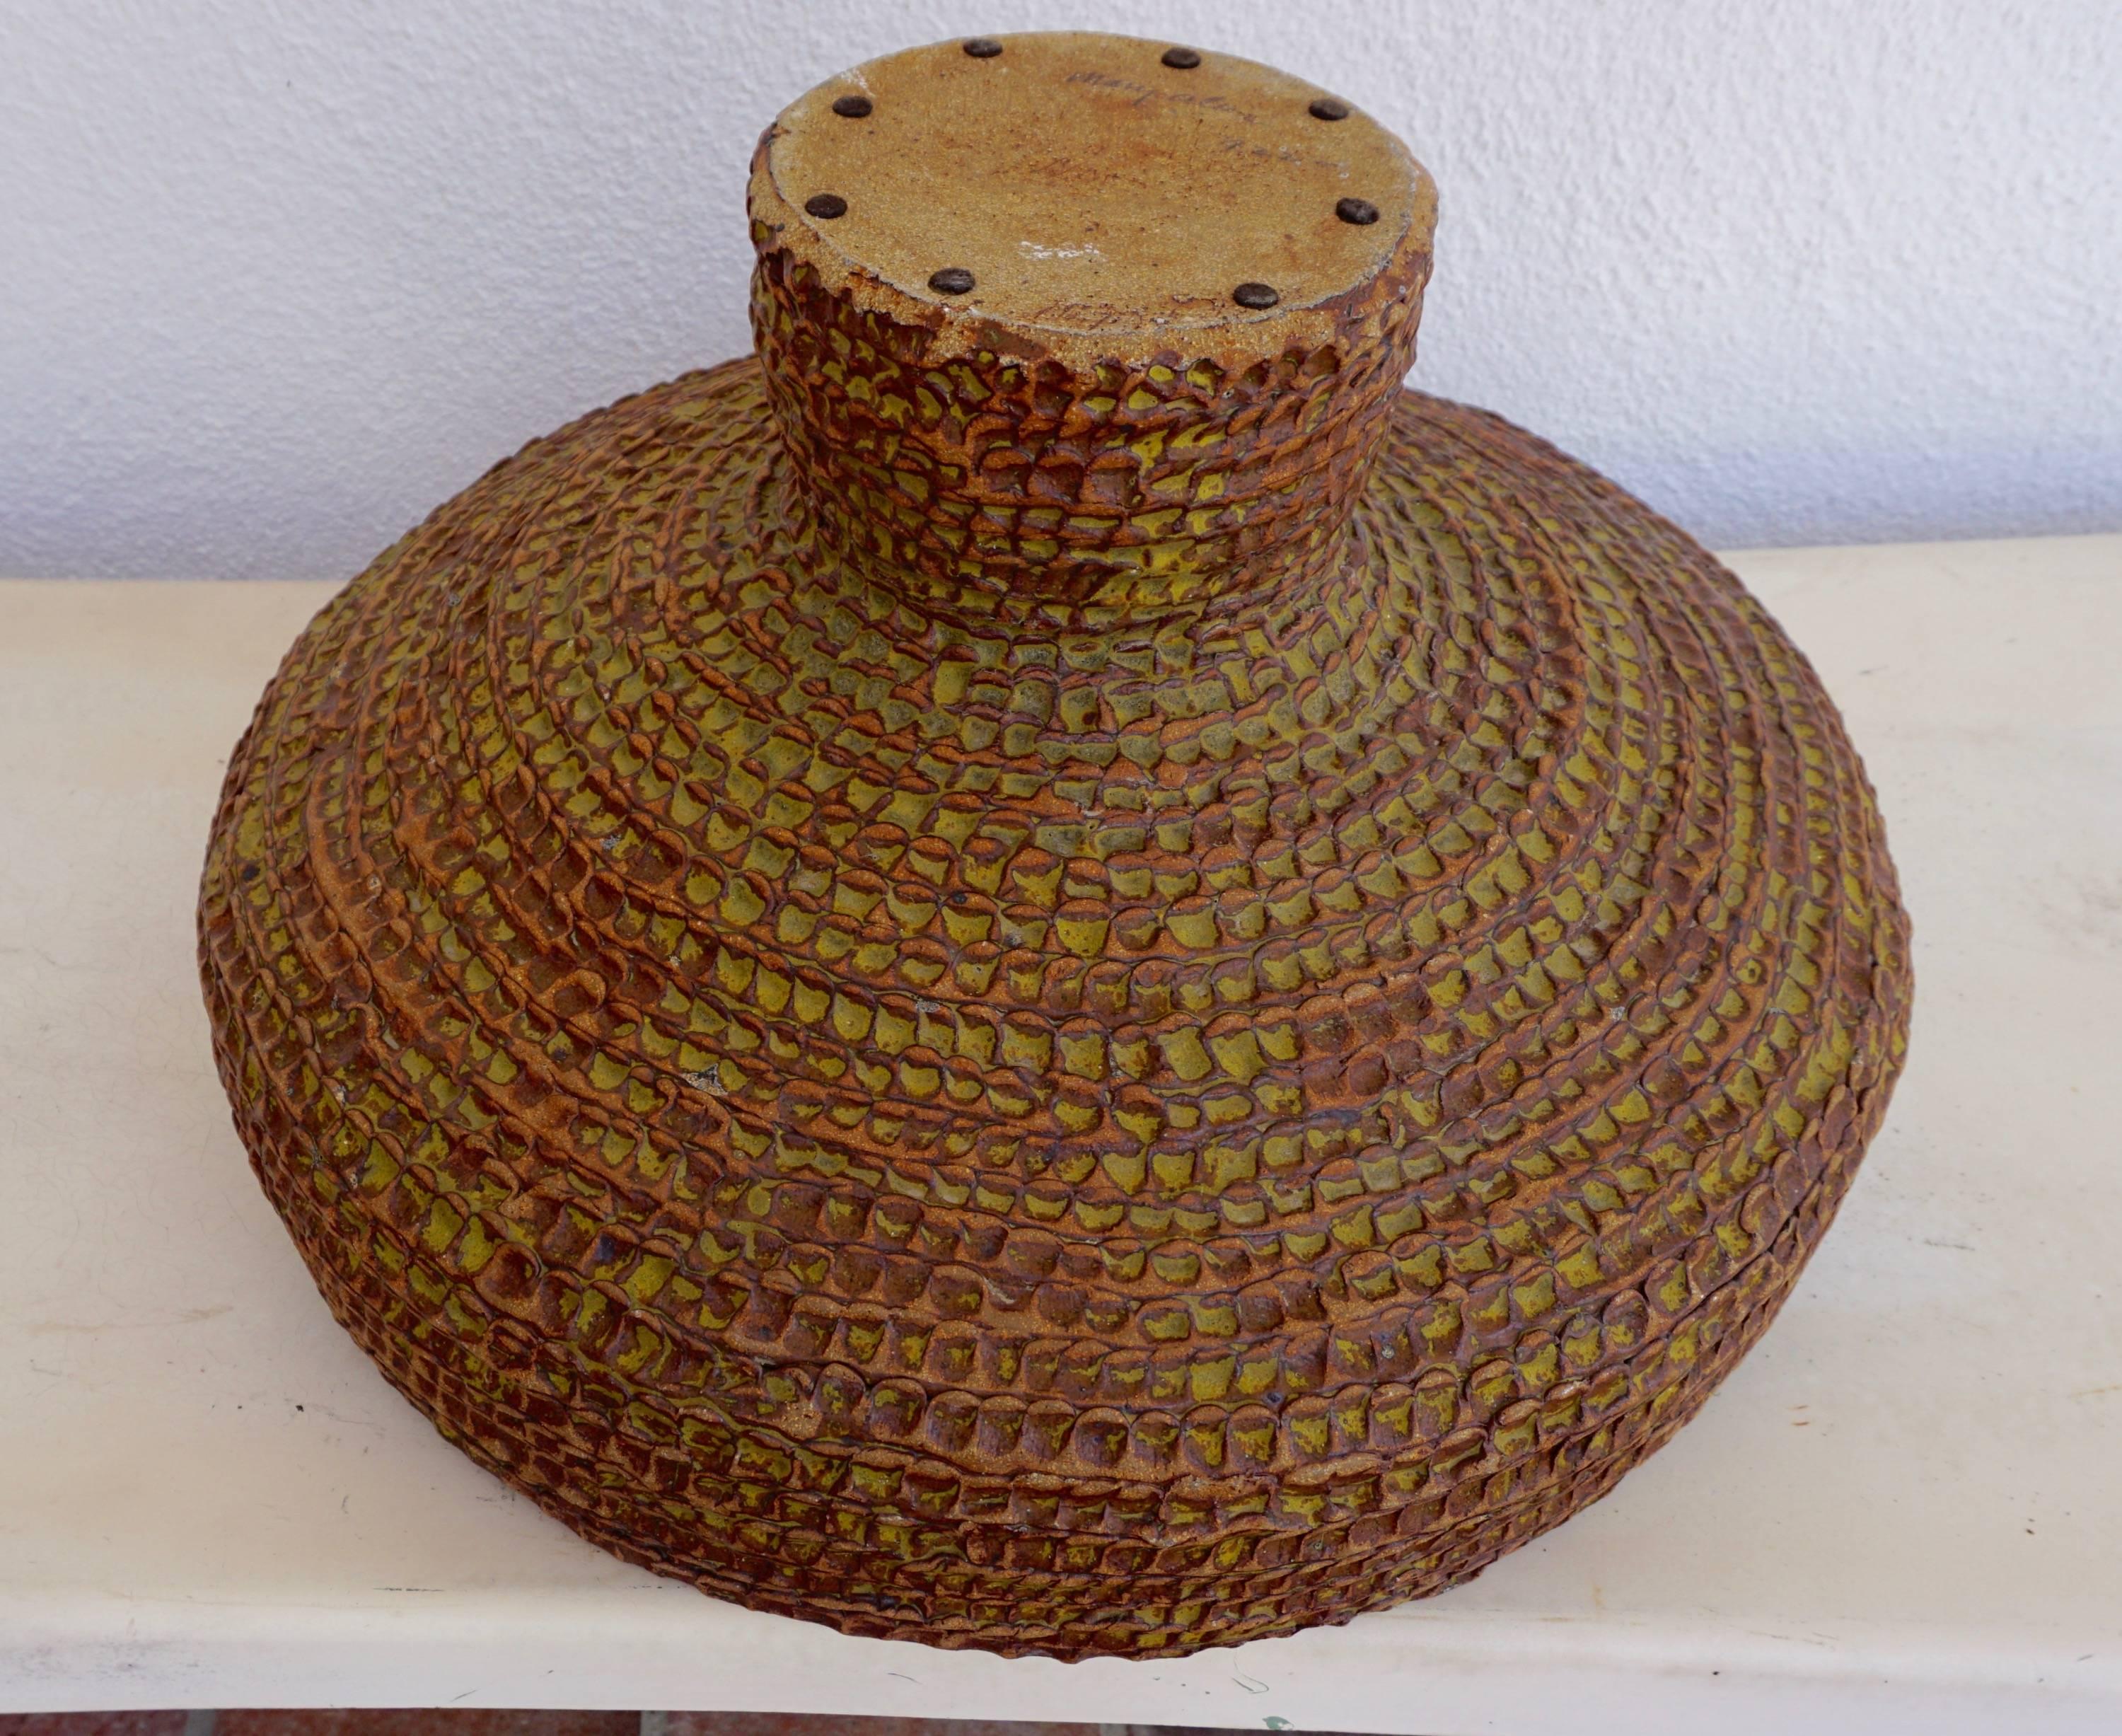 American Handformed Ceramic Pinchpot by Mary Alice McFadden